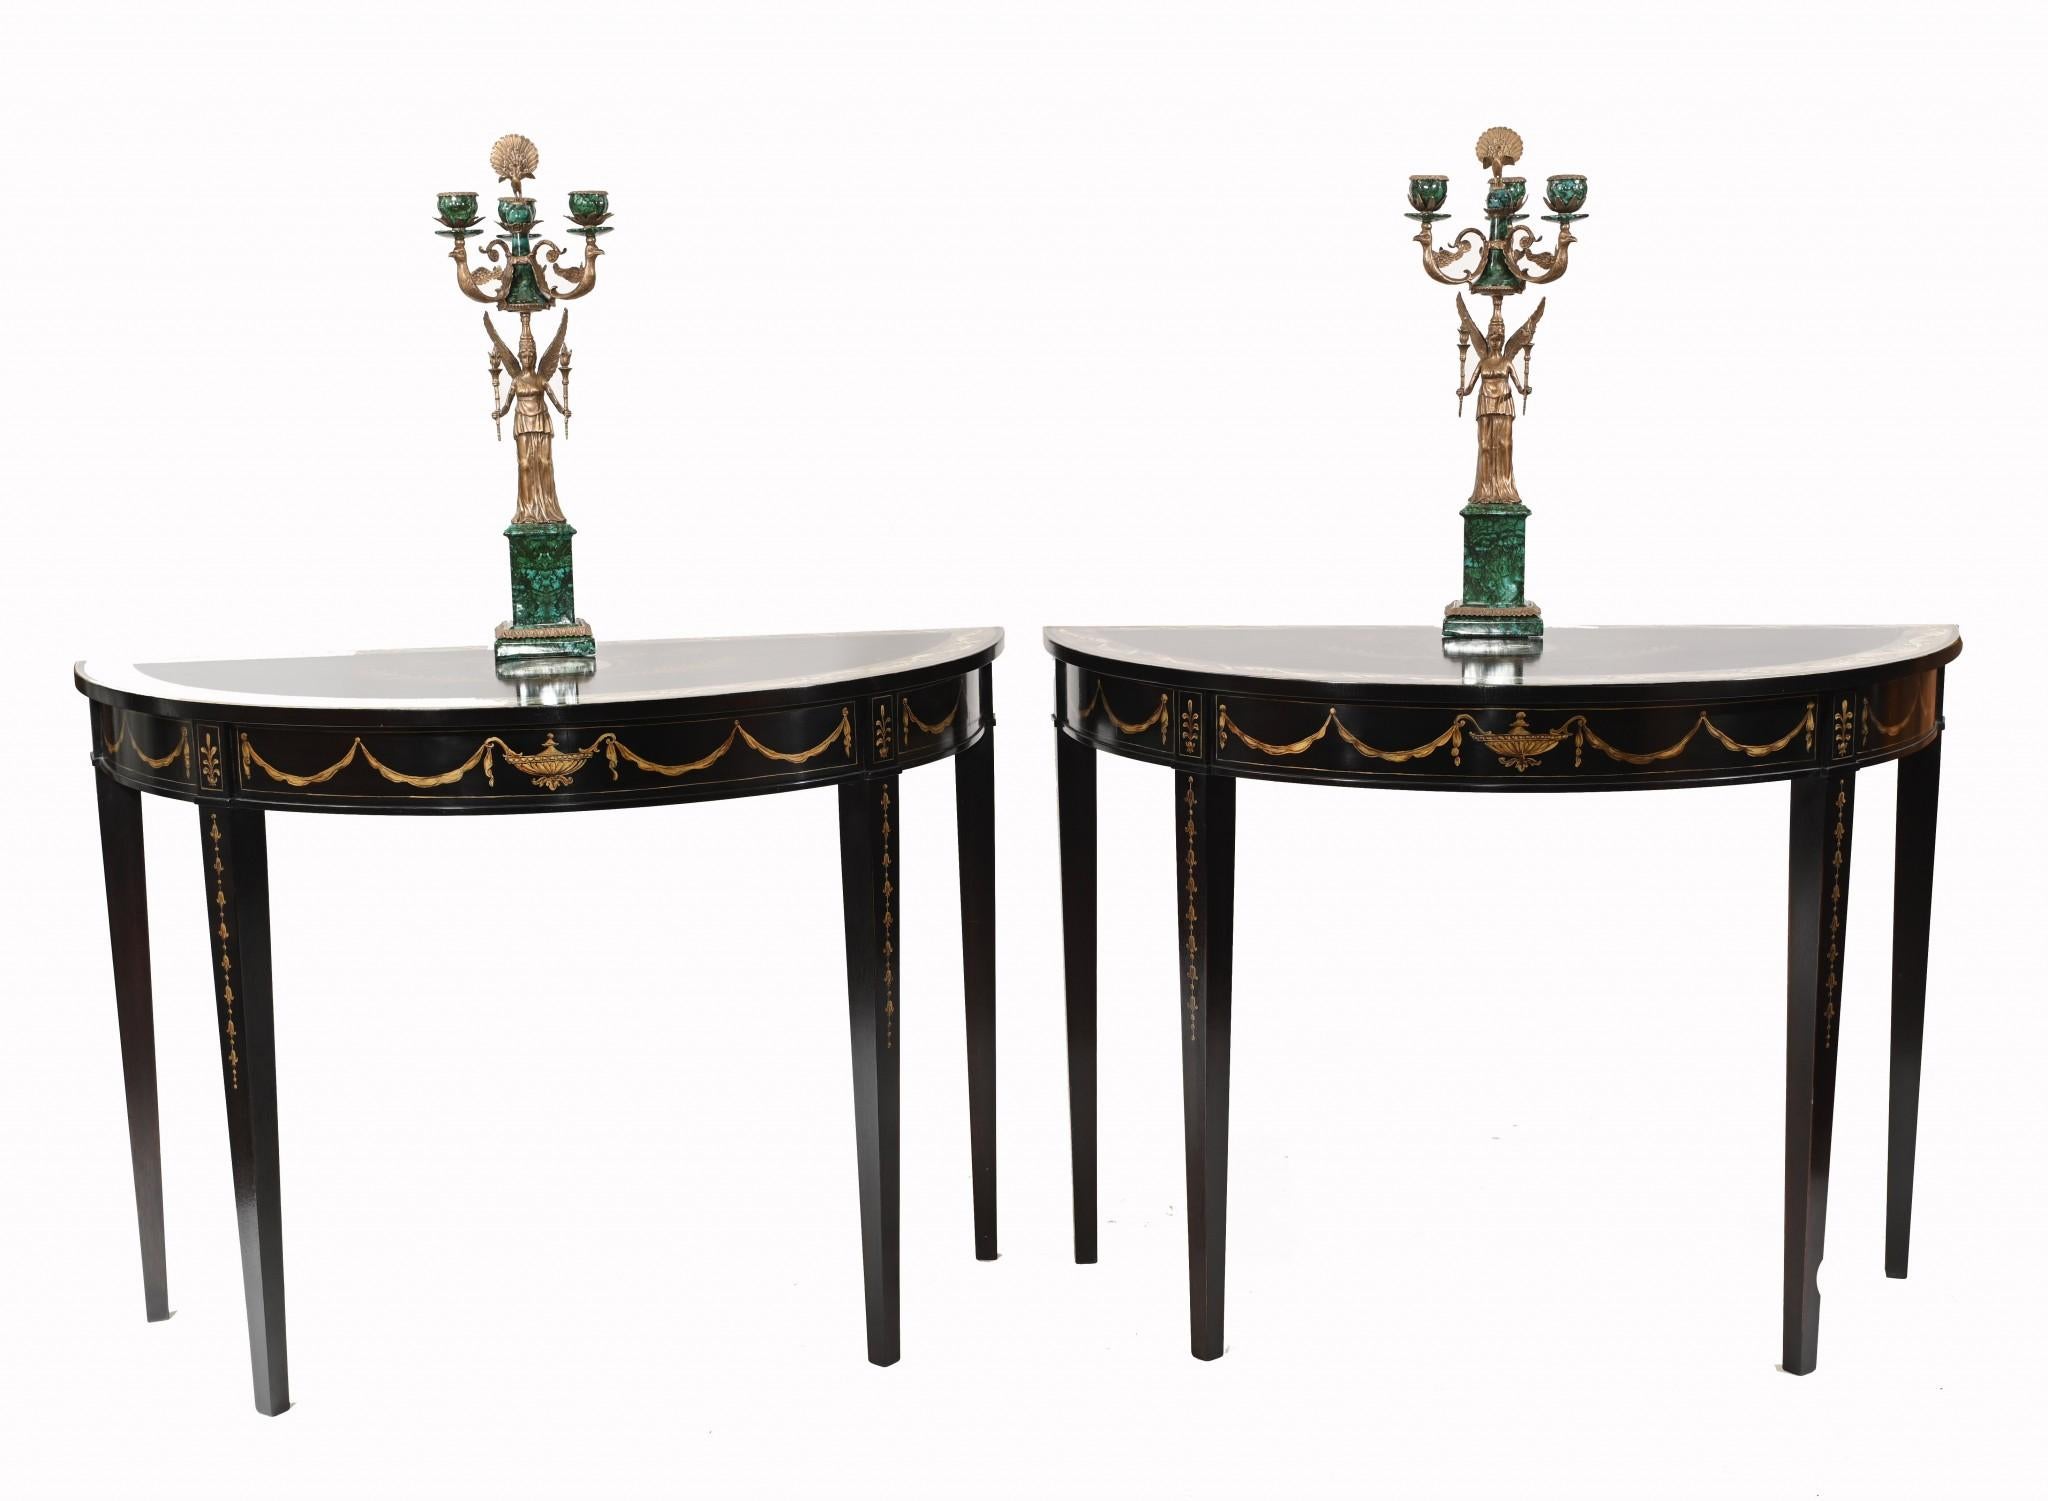 Gorgeous pair of Regency style console tables in the Adams manner
Features a lovely black lacquer finish with hand painted details
Painted details include floral motifs and arabesques
Clean and minimal design perfect for modern interiors
Some of our